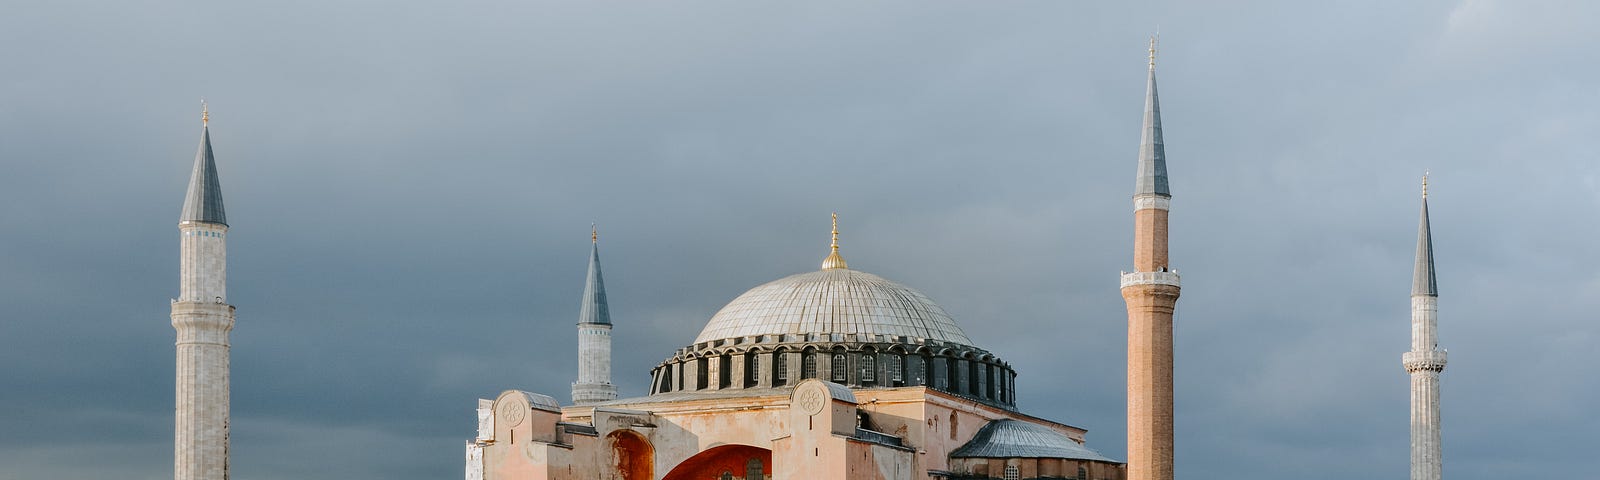 An iconic symbol associated with the event is the UNESCO World Heritage Site of Hagia Sophia or Ayasofya in Turkish parlance.